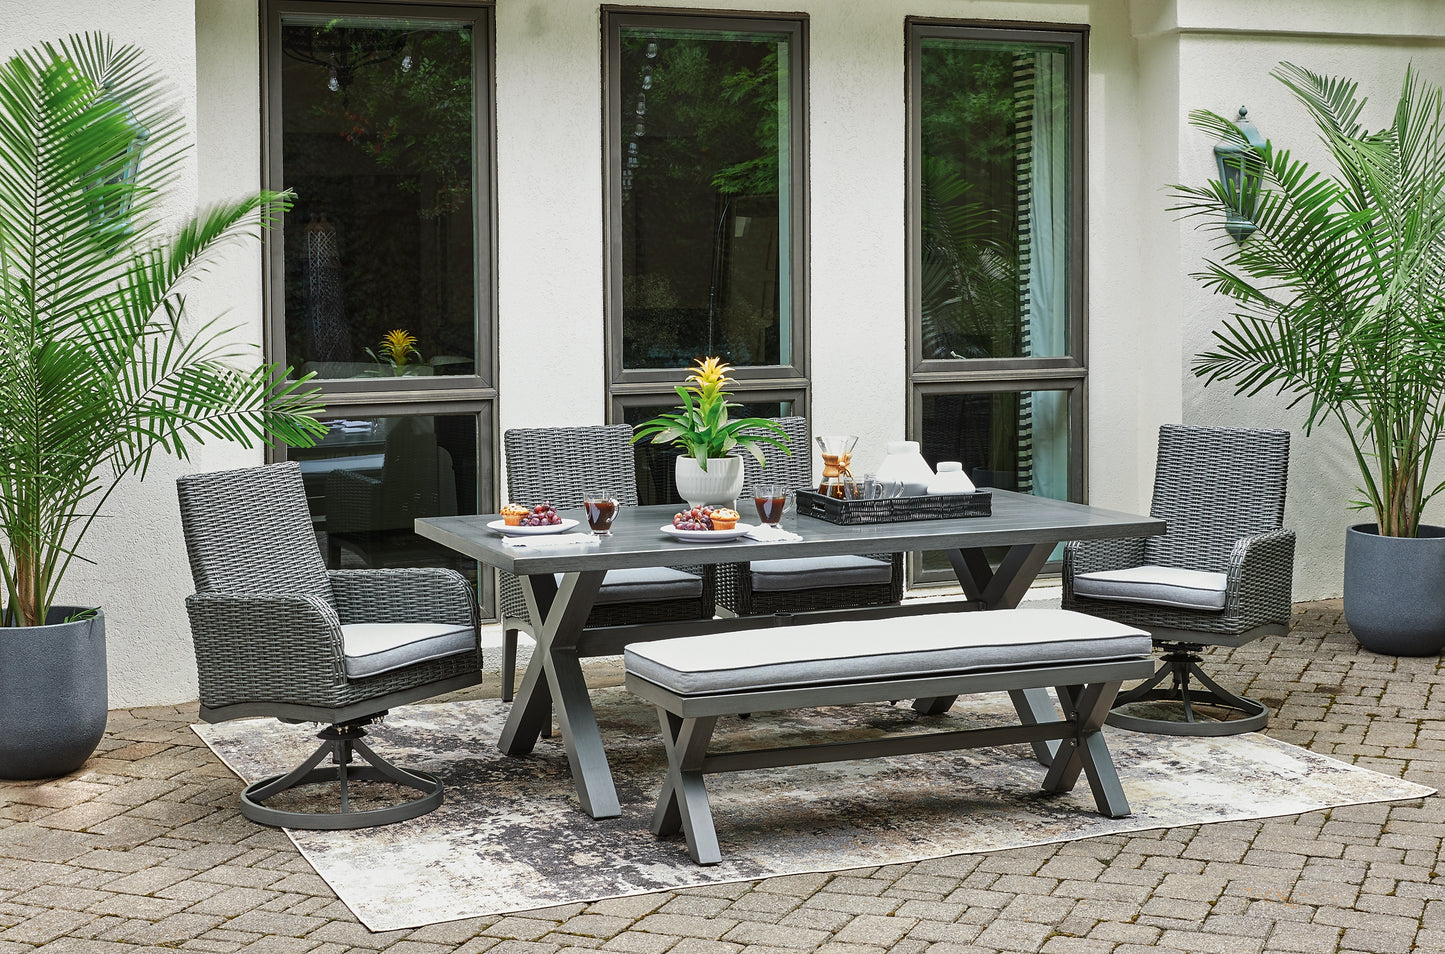 Elite Park Outdoor Dining Table and 4 Chairs and Bench